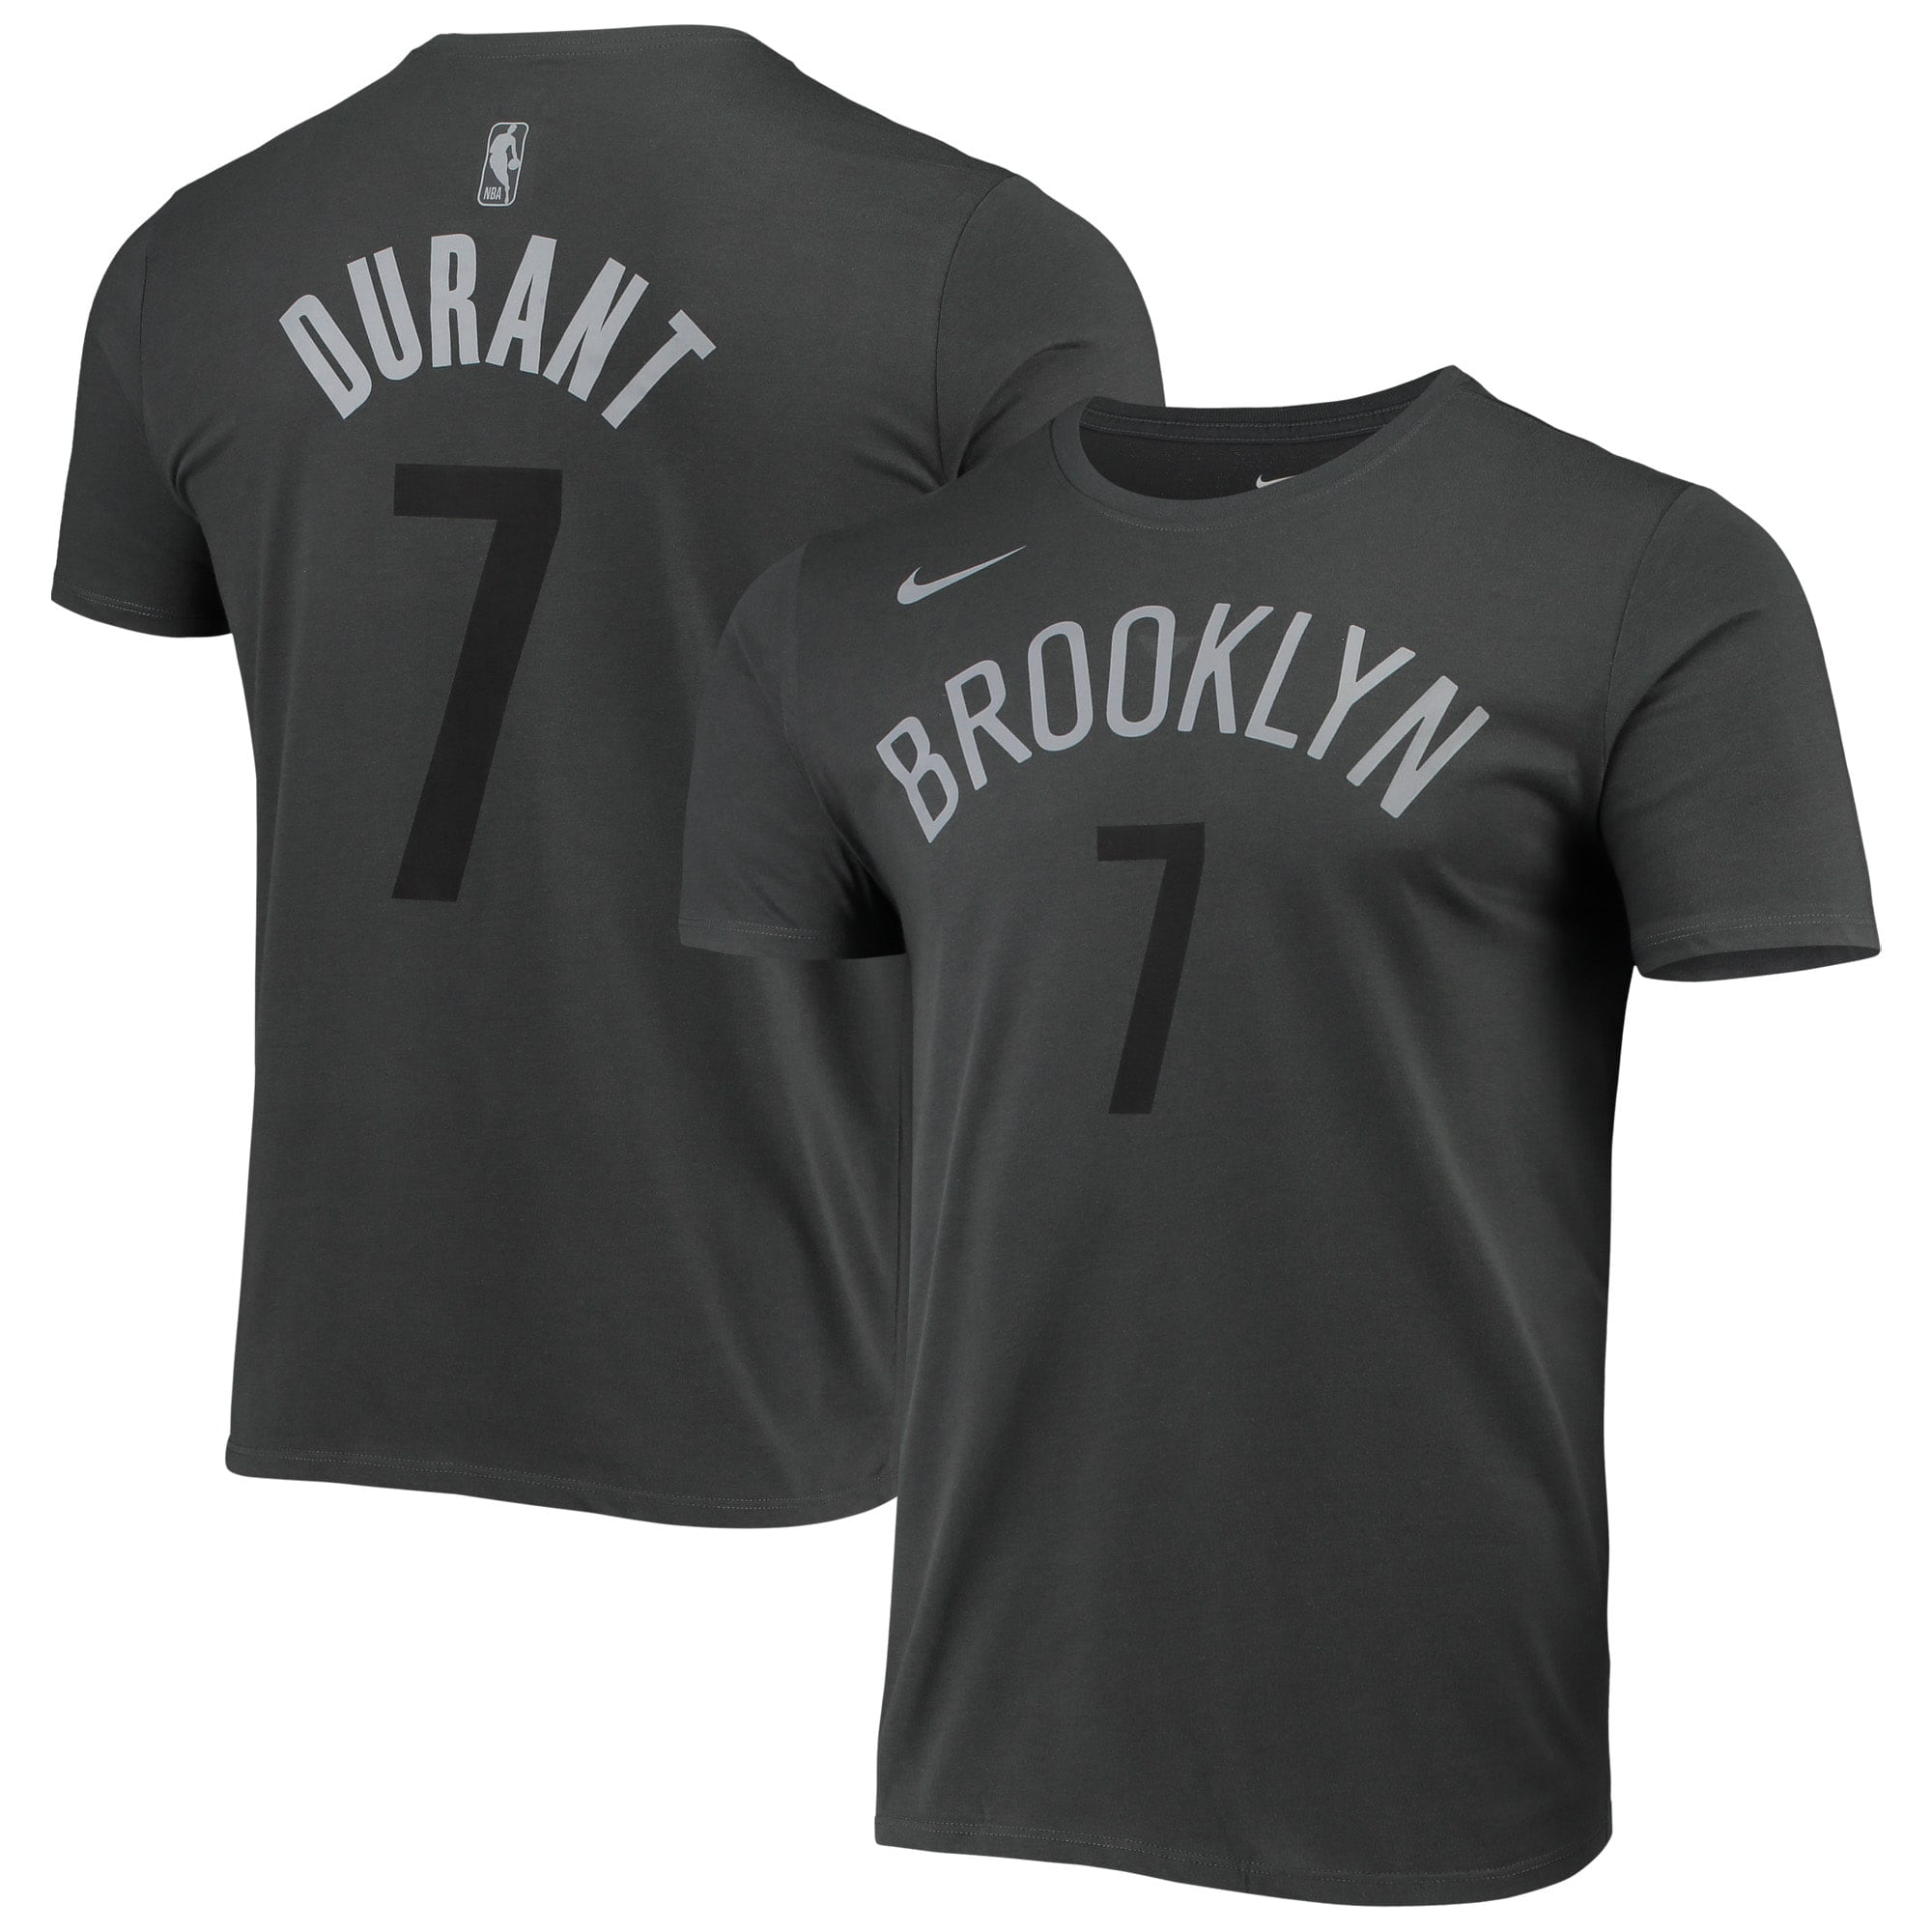 kevin durant sleeve jersey